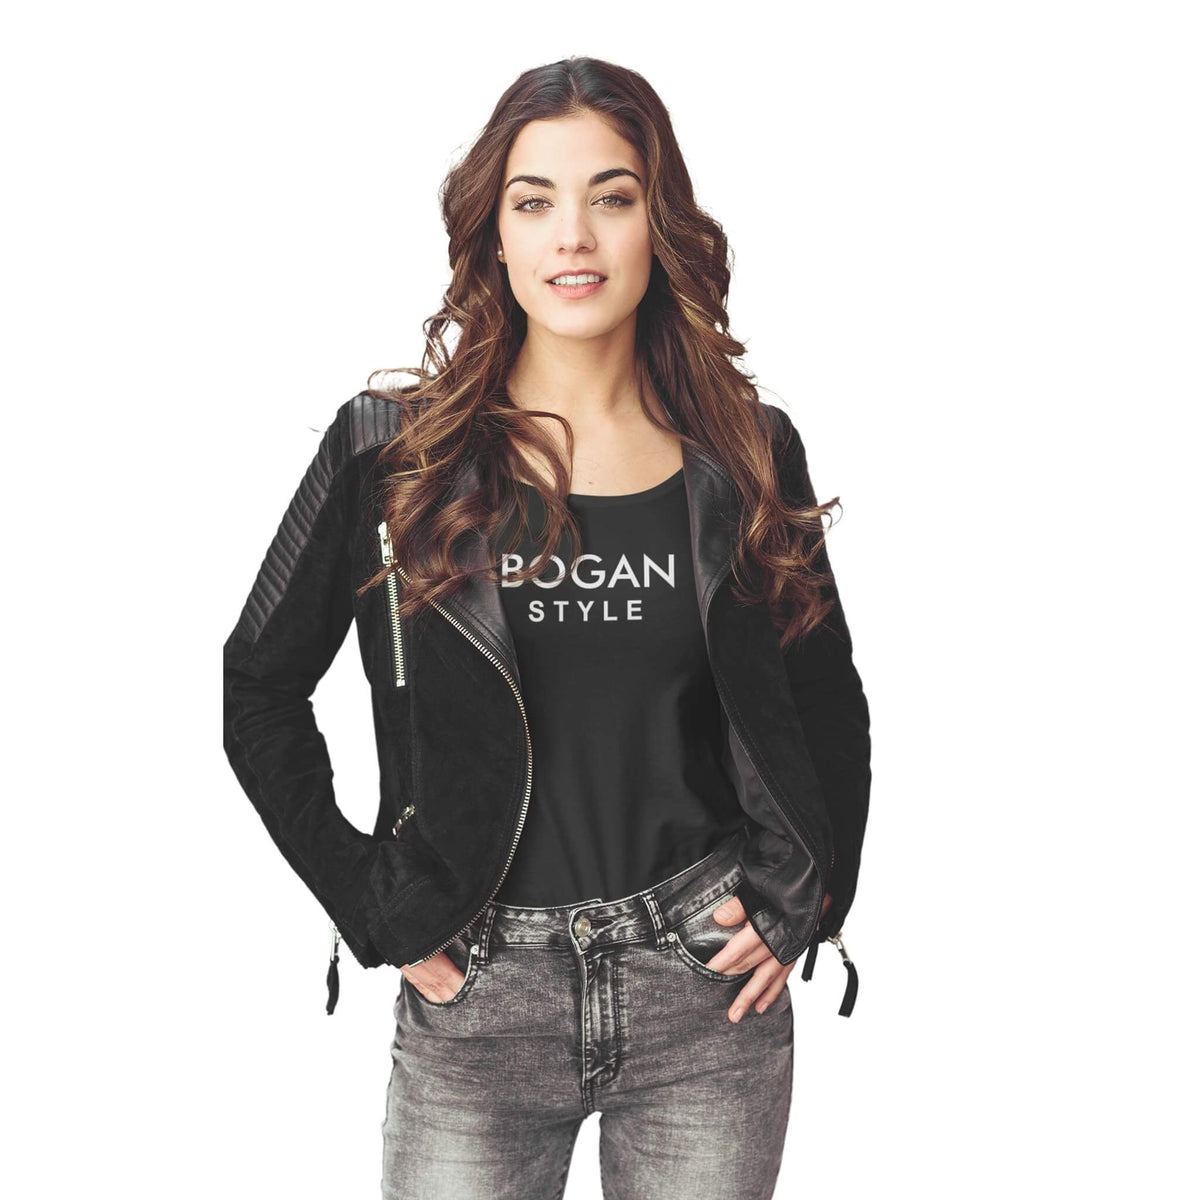 Attractive chick wearing black tee with Bogan Style on the front, teamed wth  a leather jacket and jeans